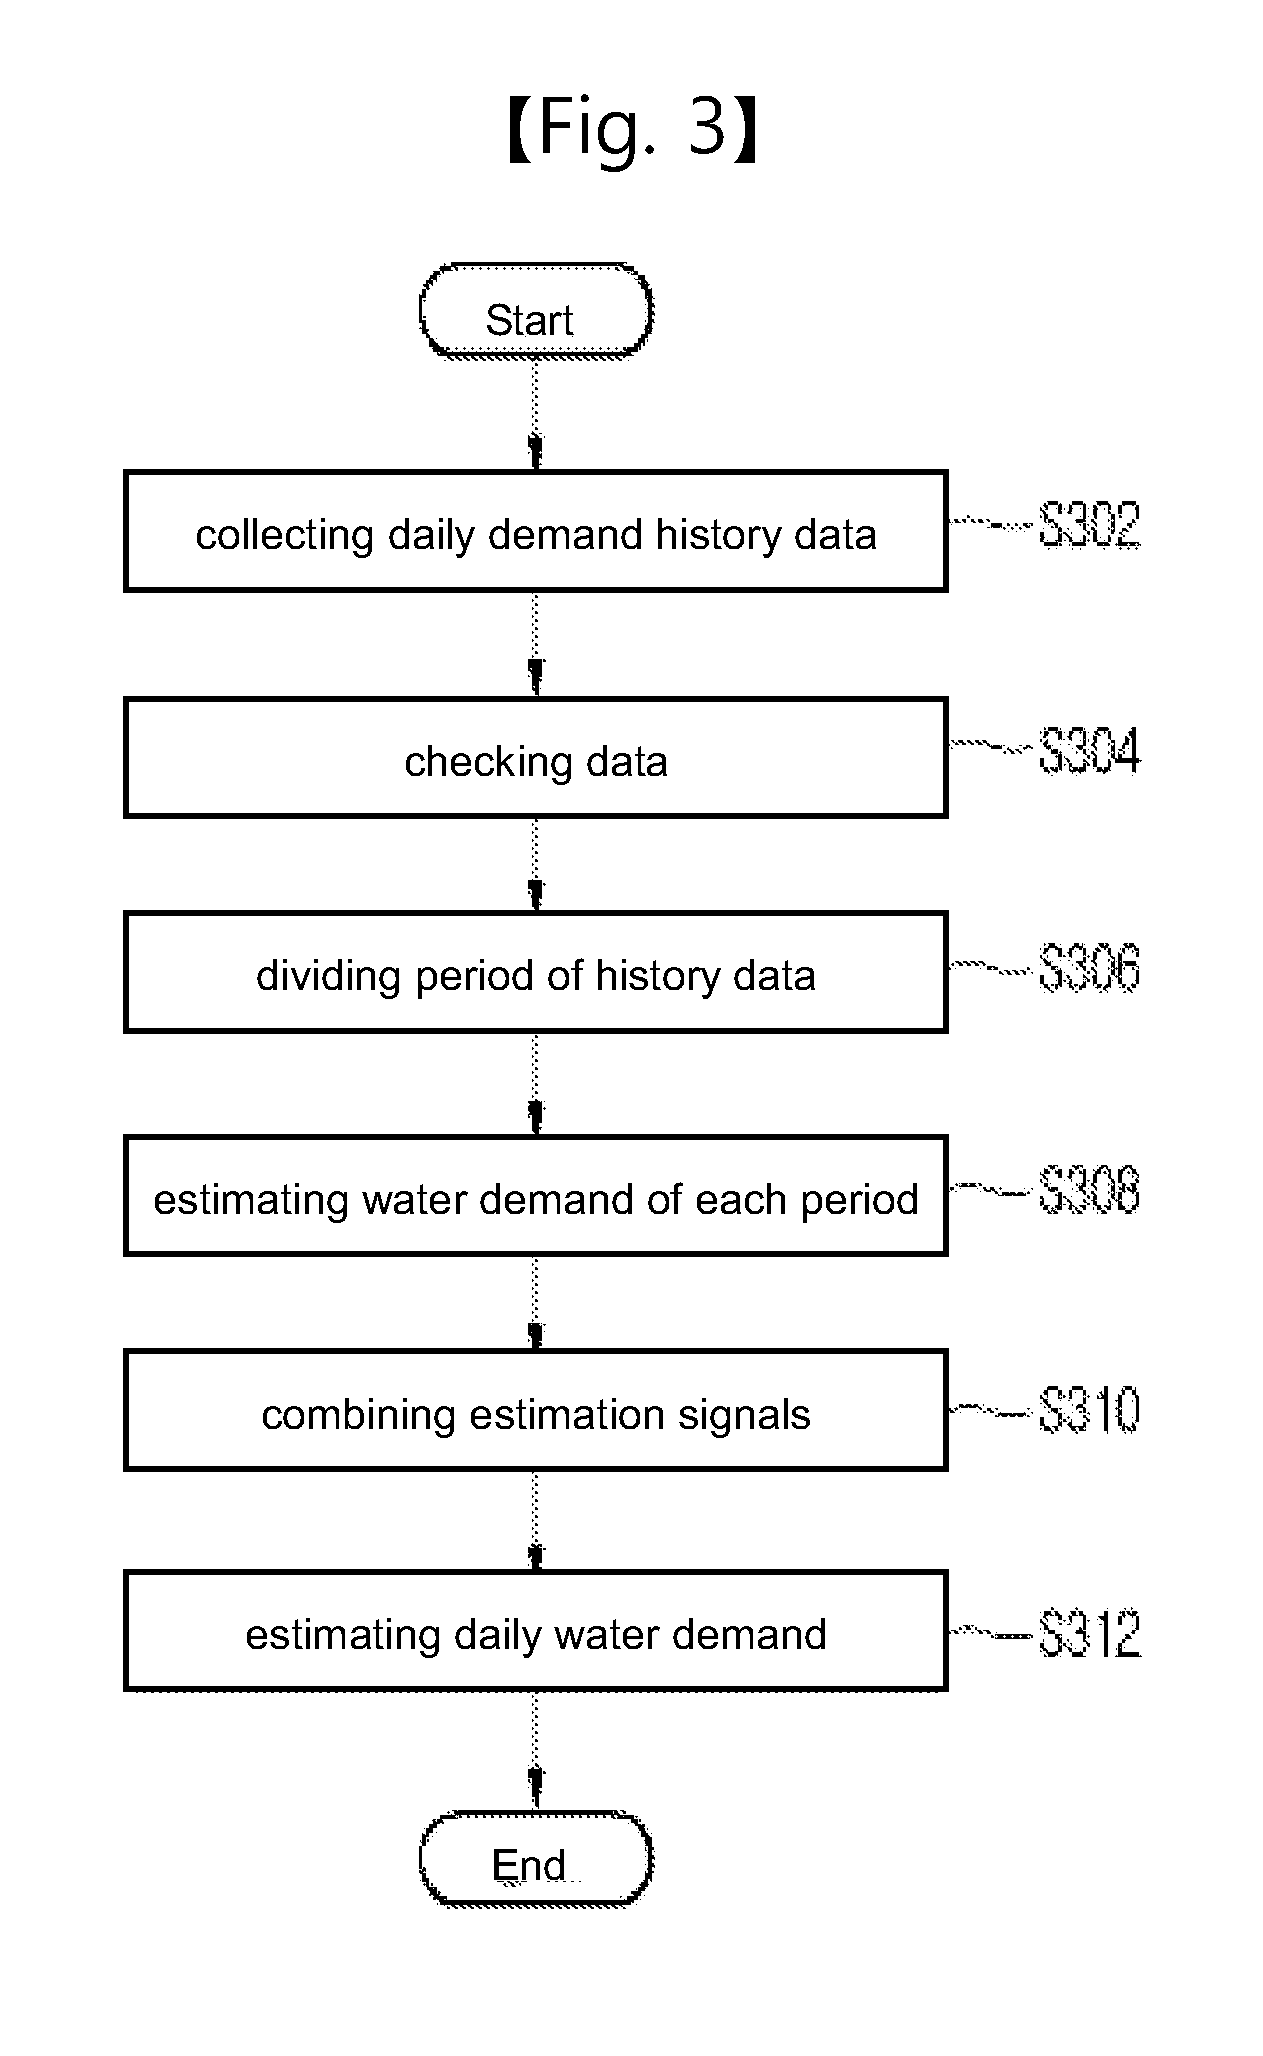 Apparatus for forecasting water demand